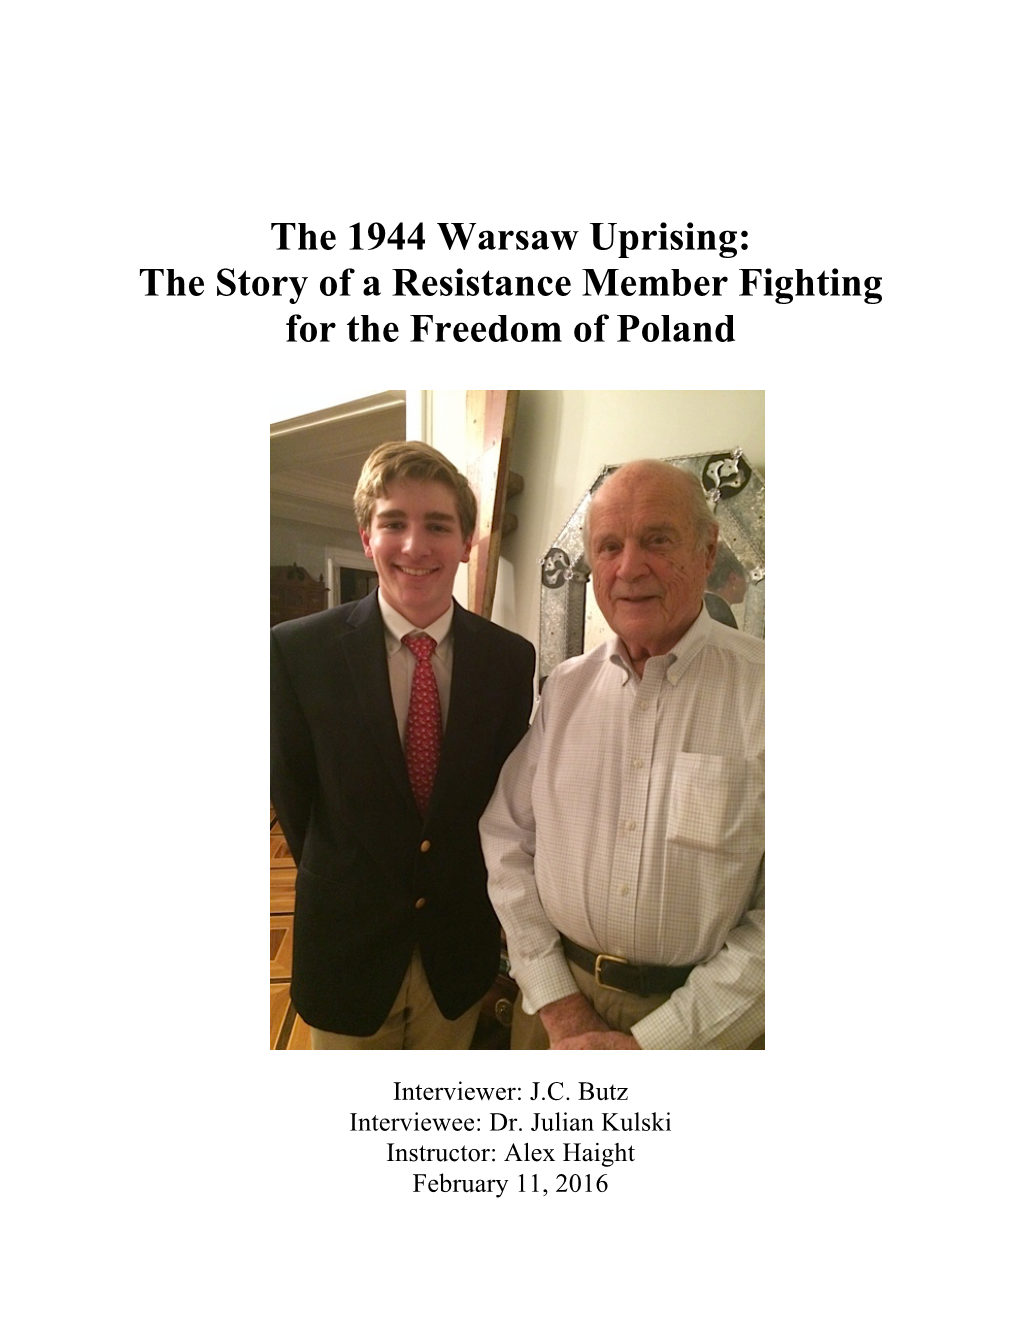 The 1944 Warsaw Uprising: the Story of a Resistance Member Fighting for the Freedom of Poland